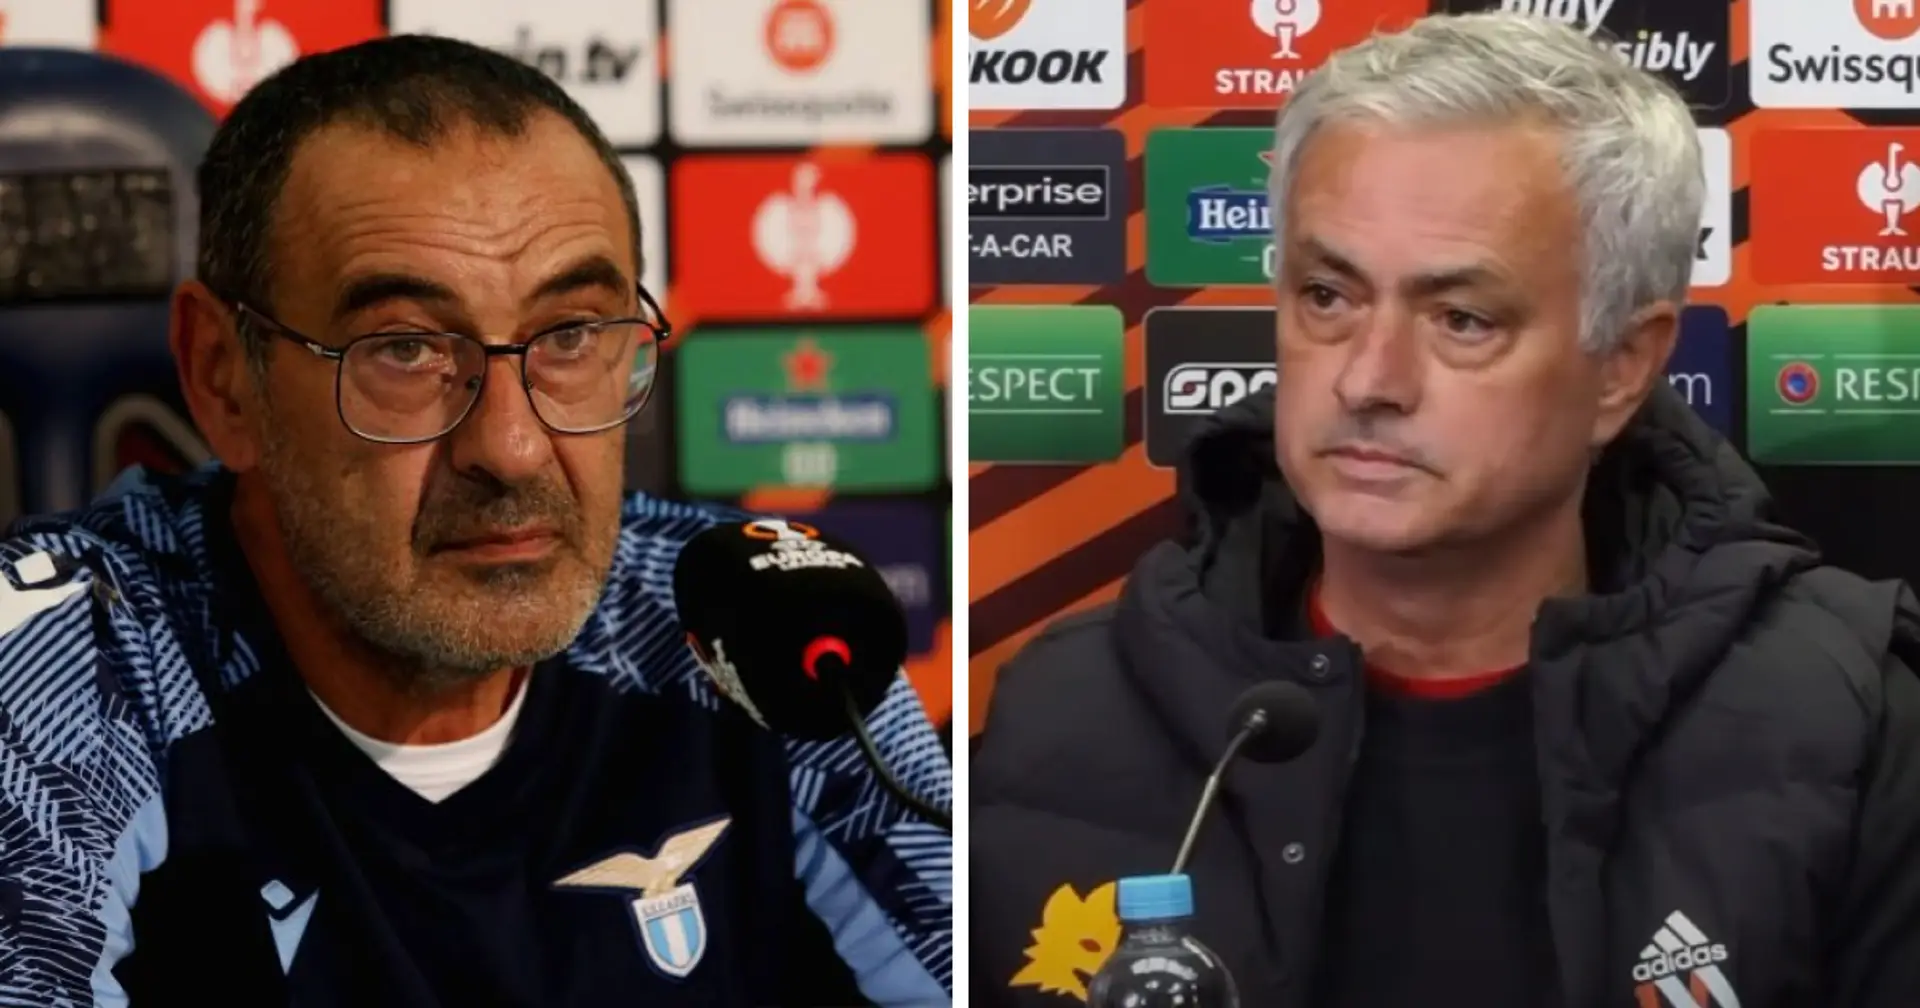 'If anyone should be offended - it's Slavia': Mourinho fires back at Maurizio Sarri for 'friendly' match comments 